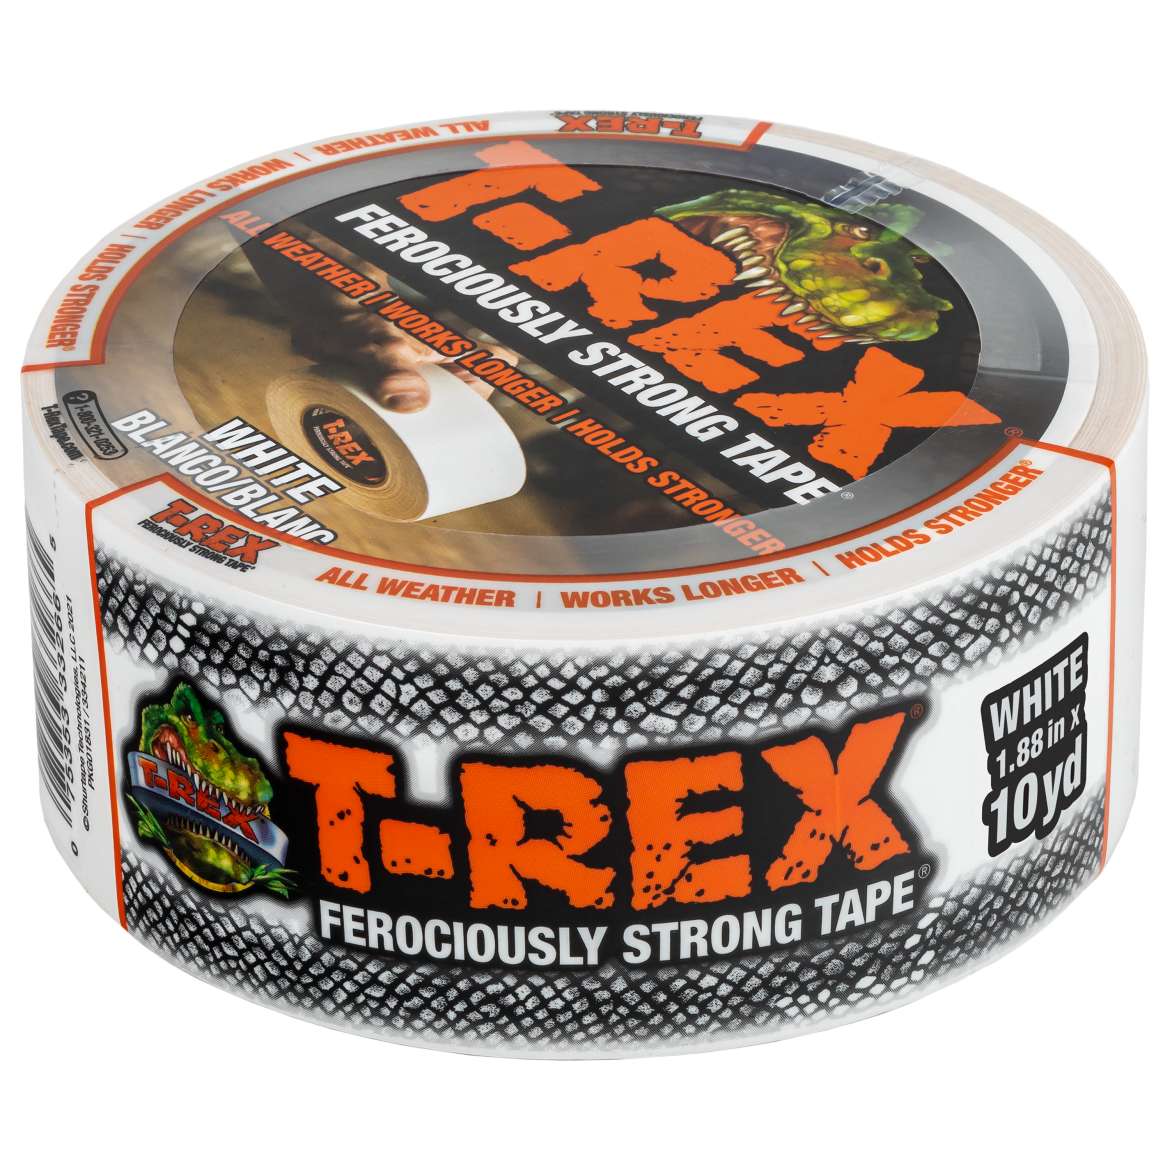 T-Rex® Ferociously Strong Tape - White, 1.88 in. x 10 yd.